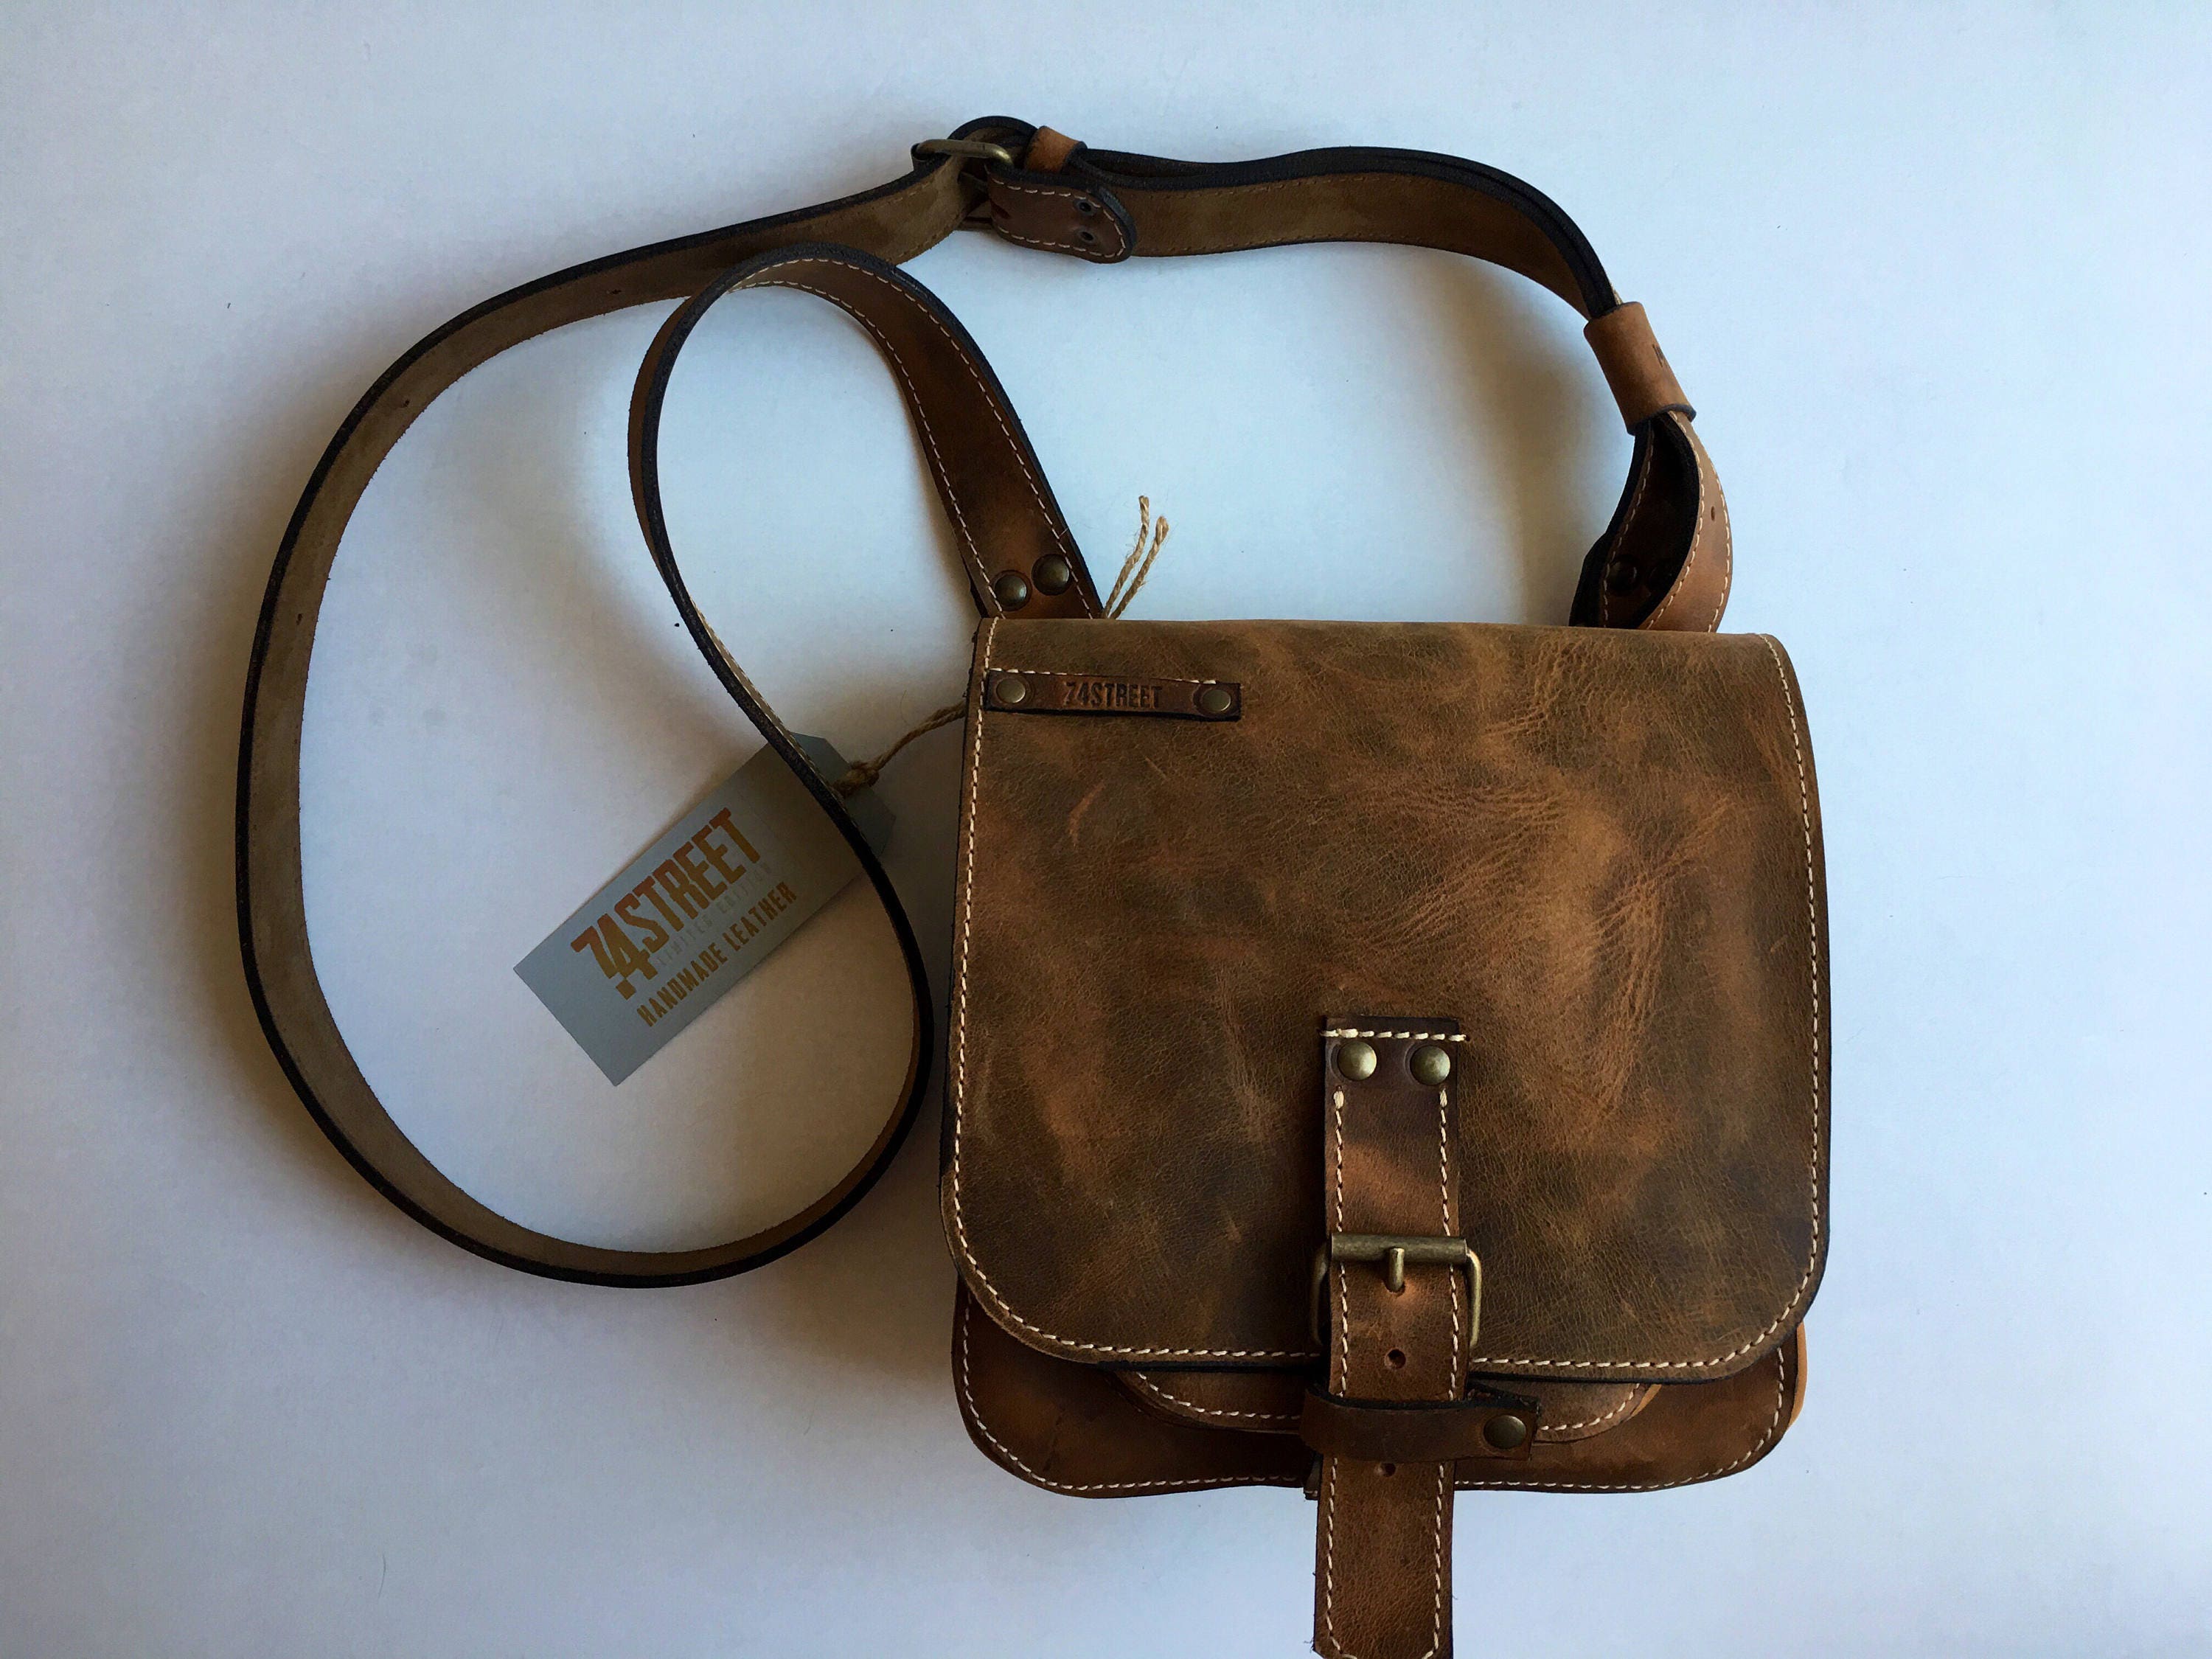 Man Leather Bag, Leather Crossover Bag, Cross Body Bag, Cross Over Bag, Man Bag, Man Travel Bag ...